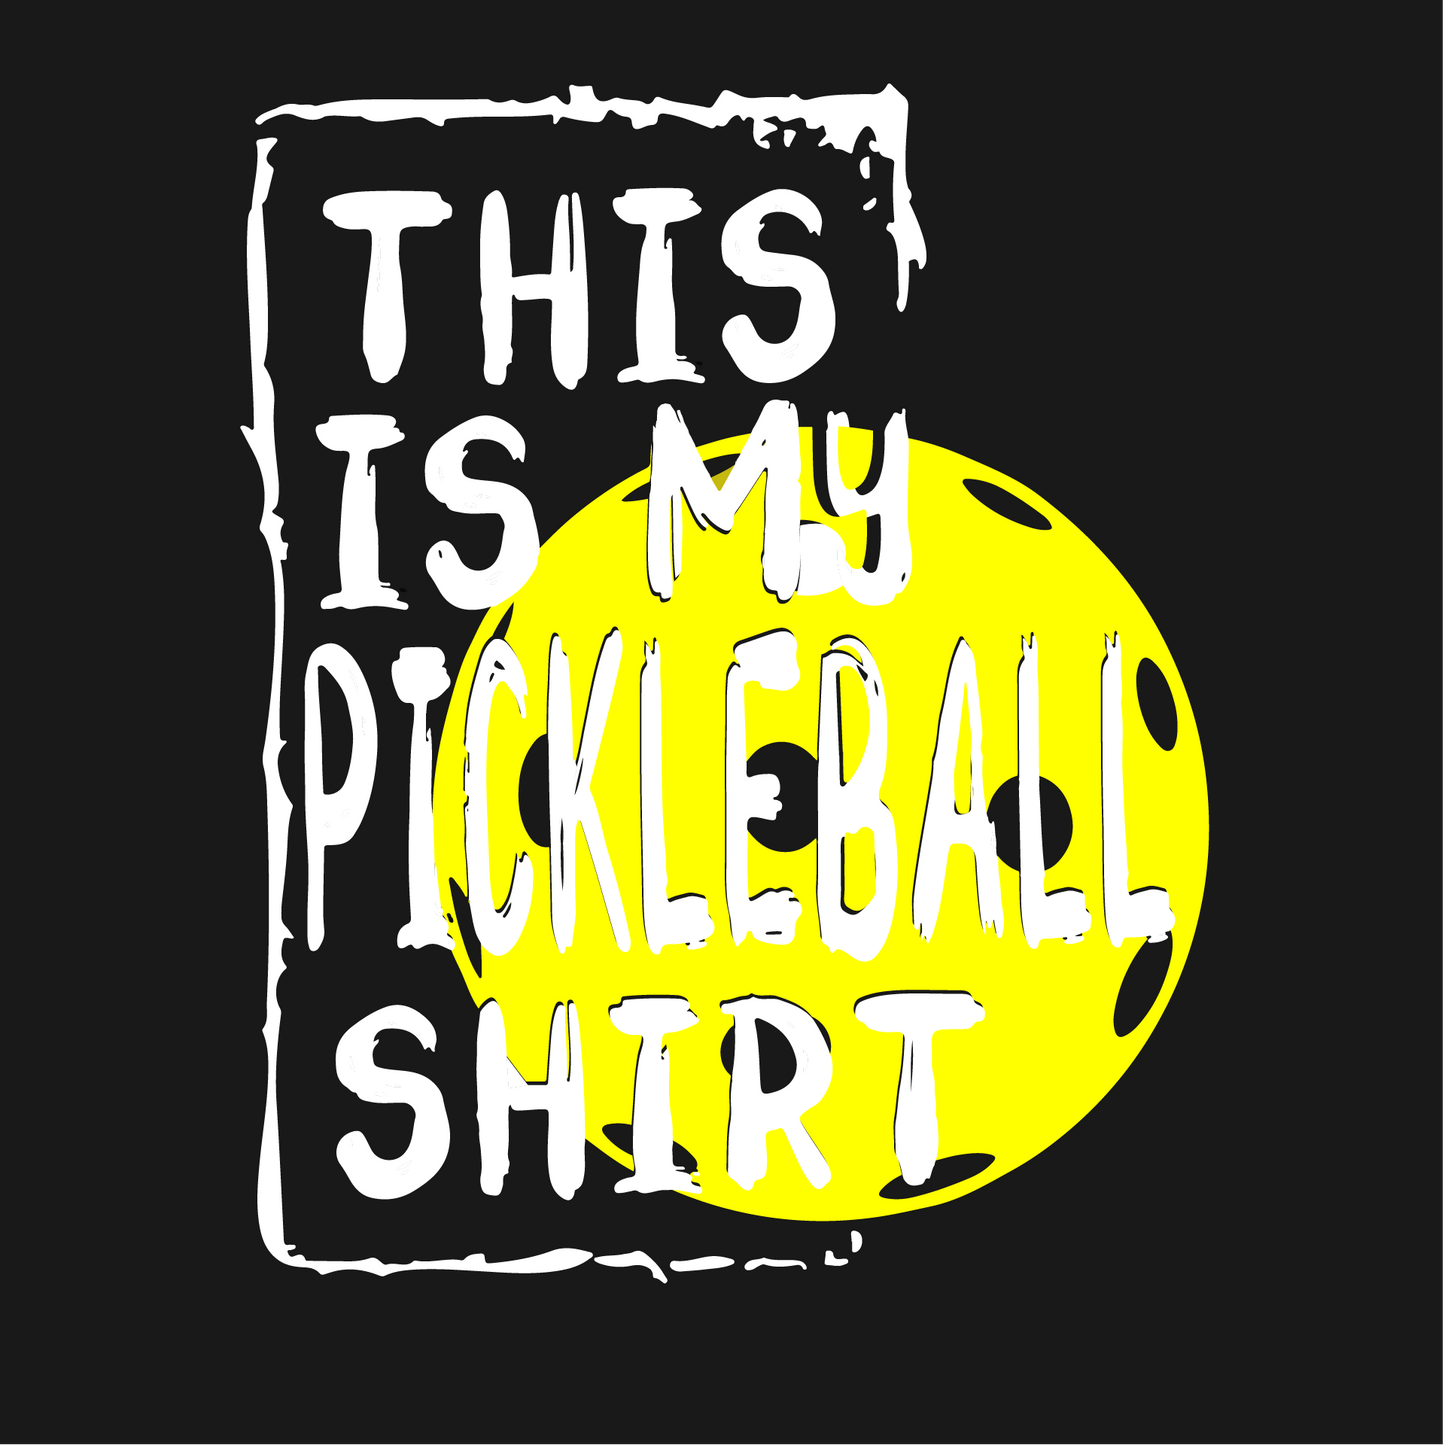 This Is My Pickleball Shirt | Youth Long Sleeve Athletic Pickleball Shirt | 100% Polyester